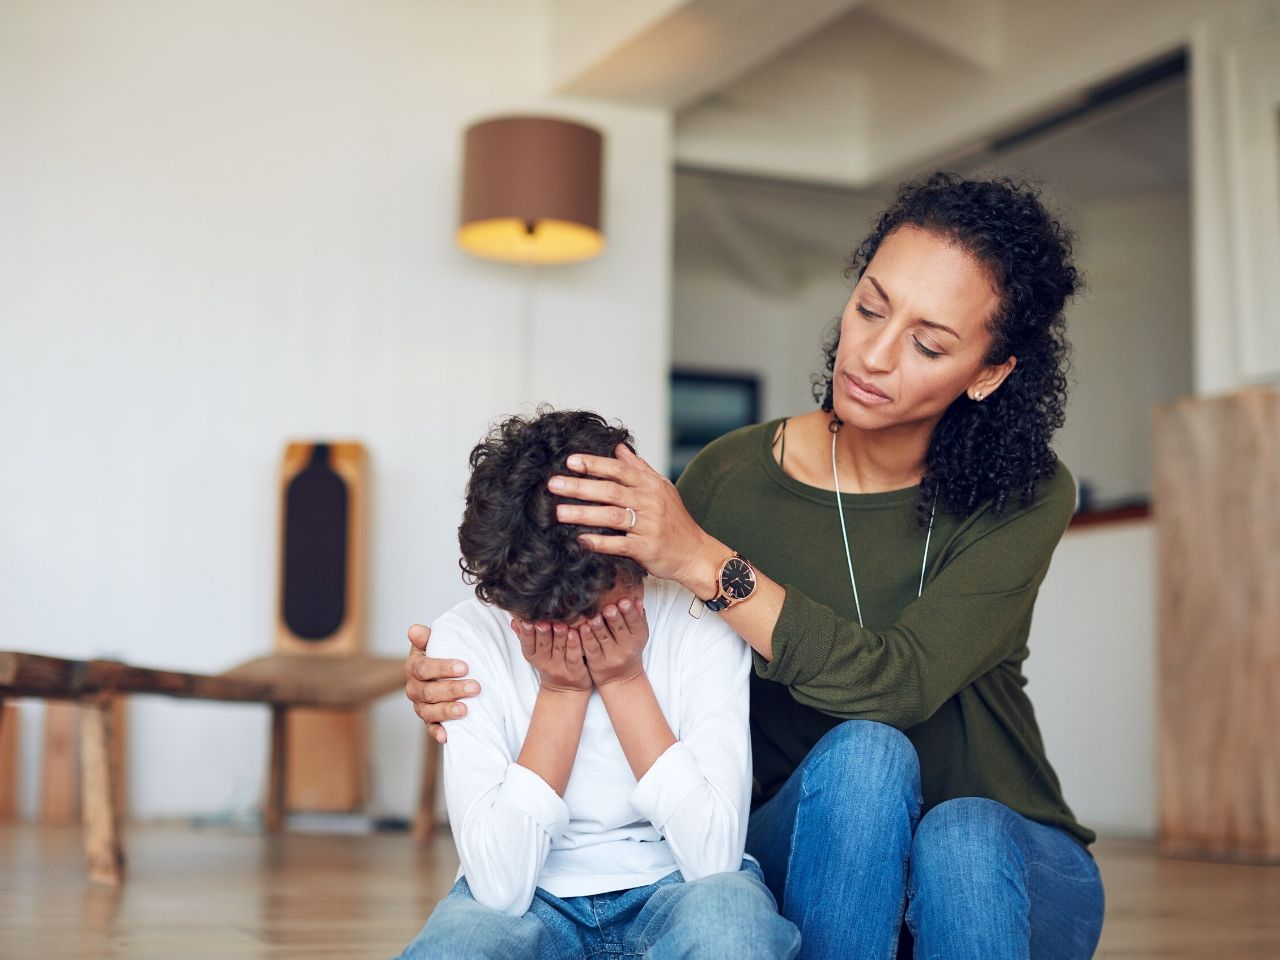 How to stop bullying: 9 ways to prevent your kid from being a victim